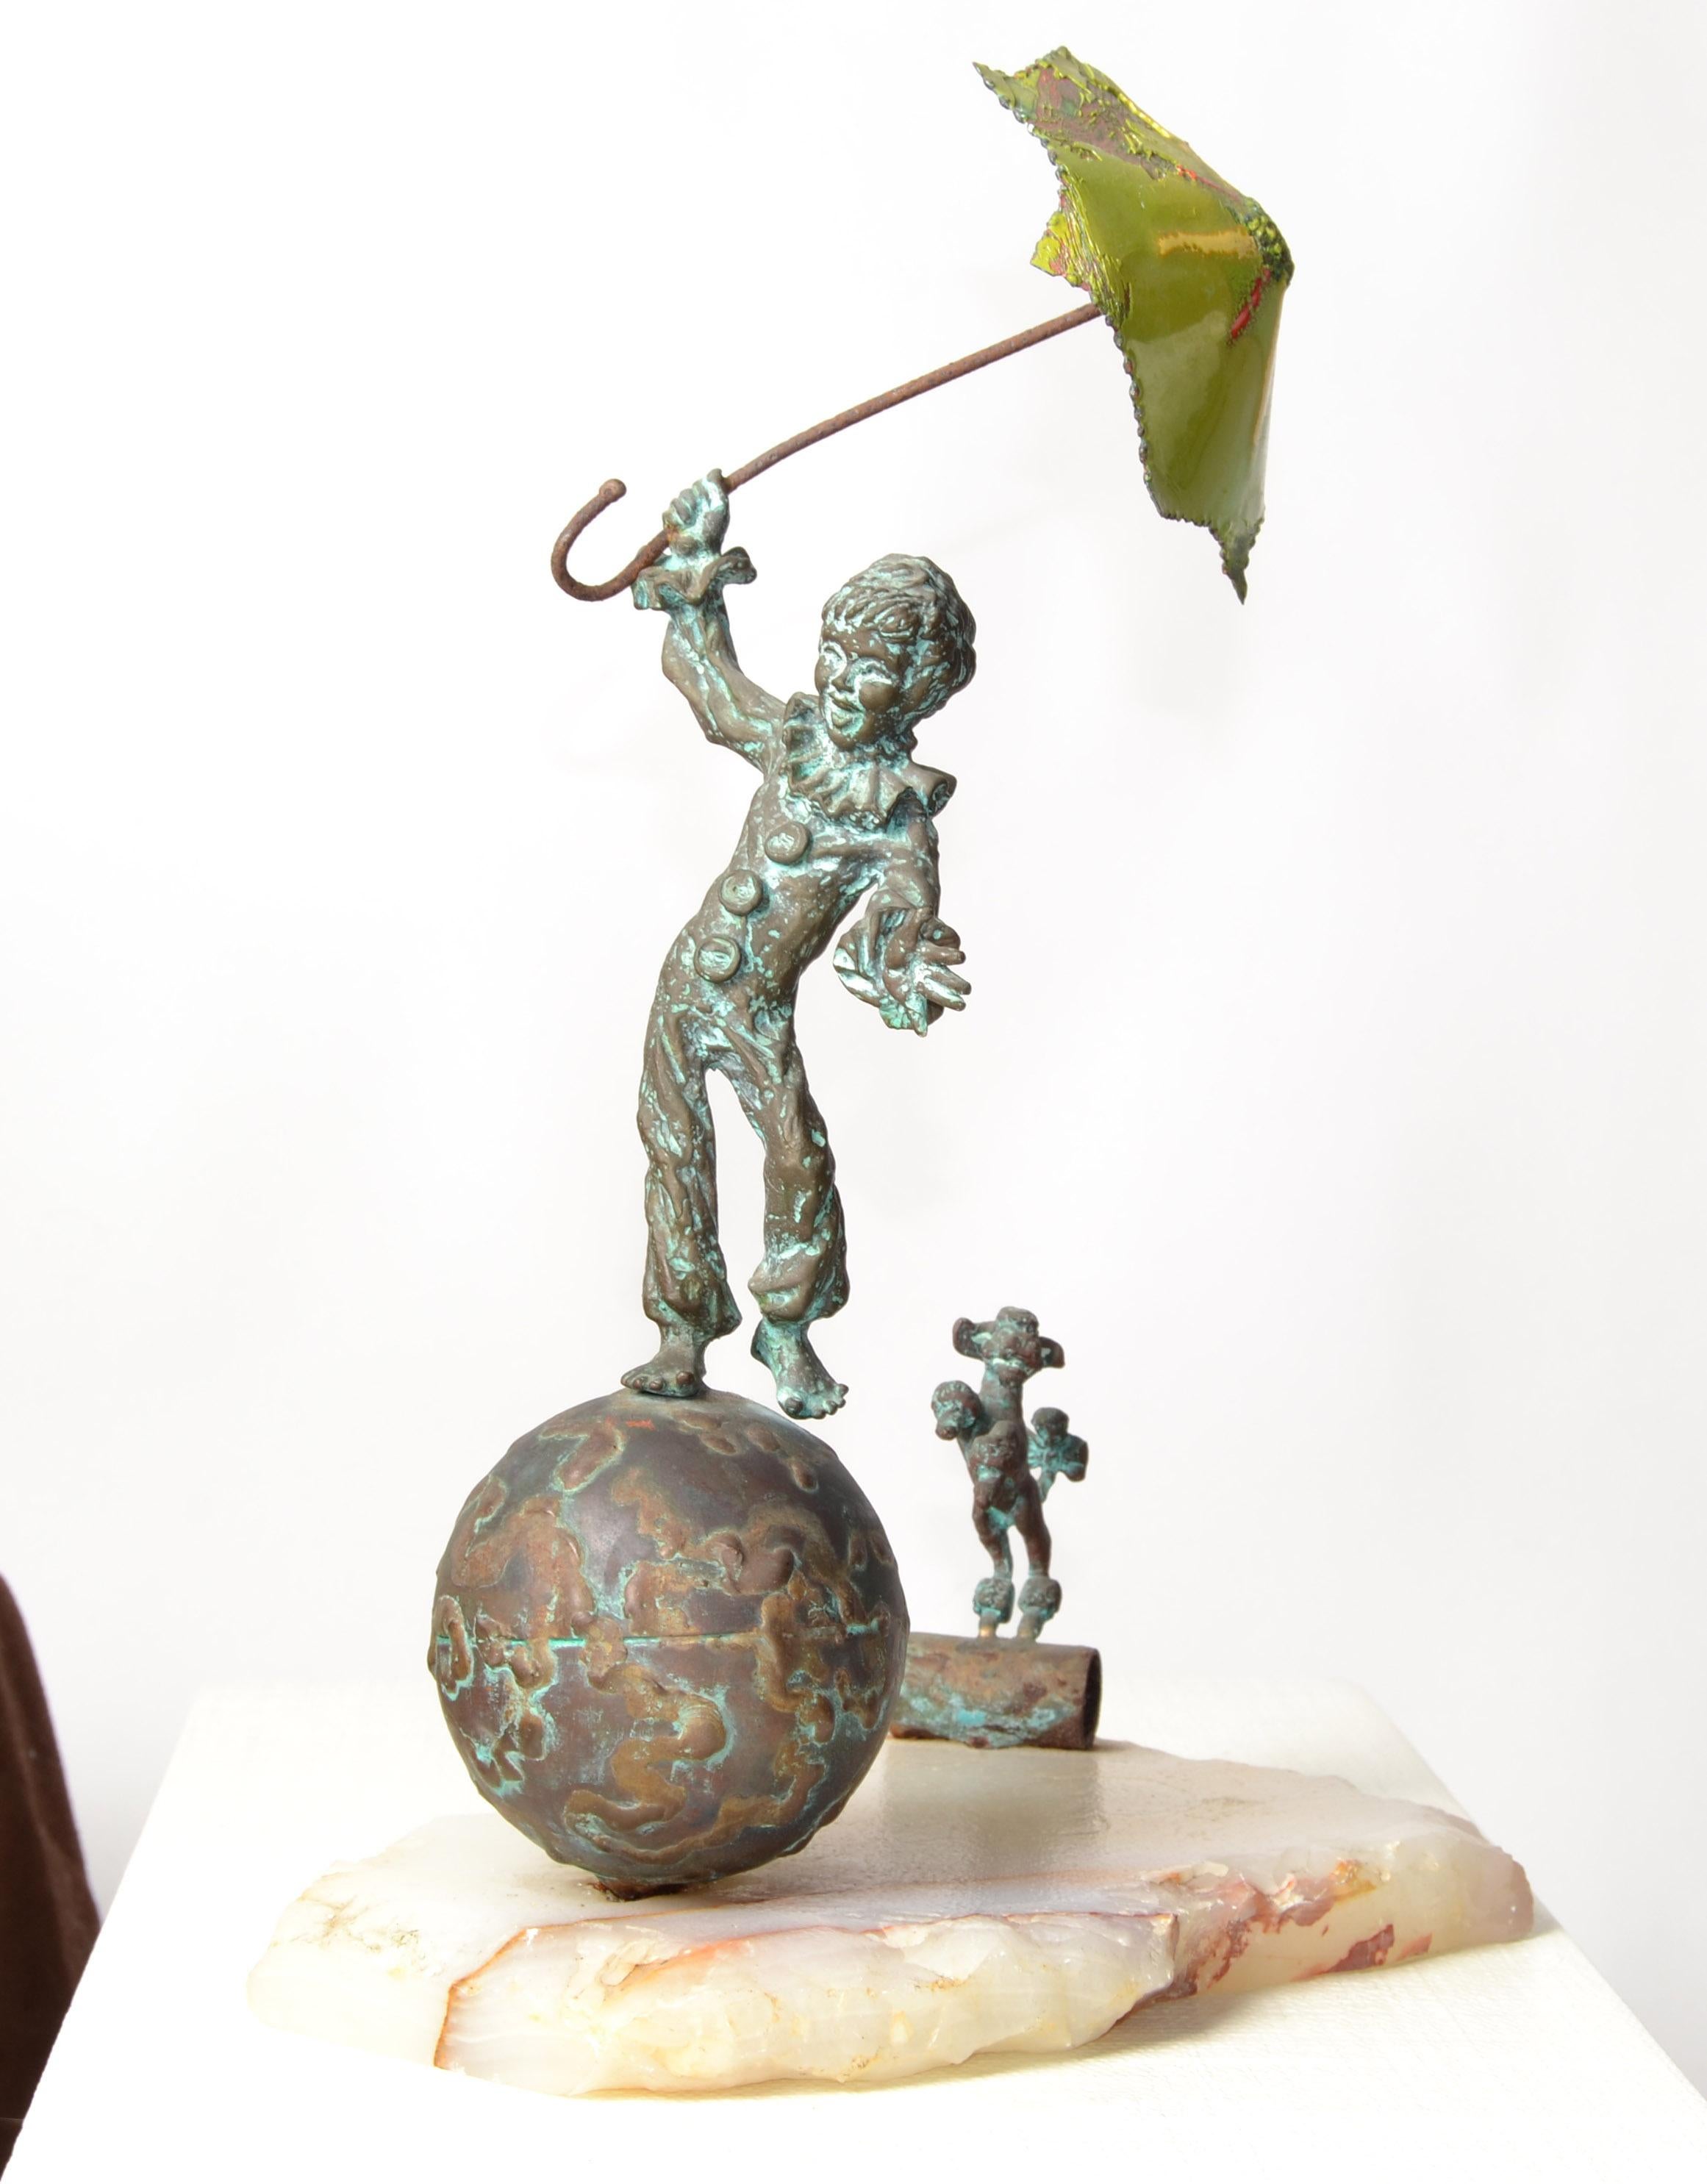 Original Bijan Studio Bronze on Alabaster Sculpture titled On Top Of The World by Artist Bijan. 
Beautiful Statue, Figurine or Table Sculpture of a Clown Boy balancing with his Enamel hand-painted Umbrella on the round World and his Poodle dog